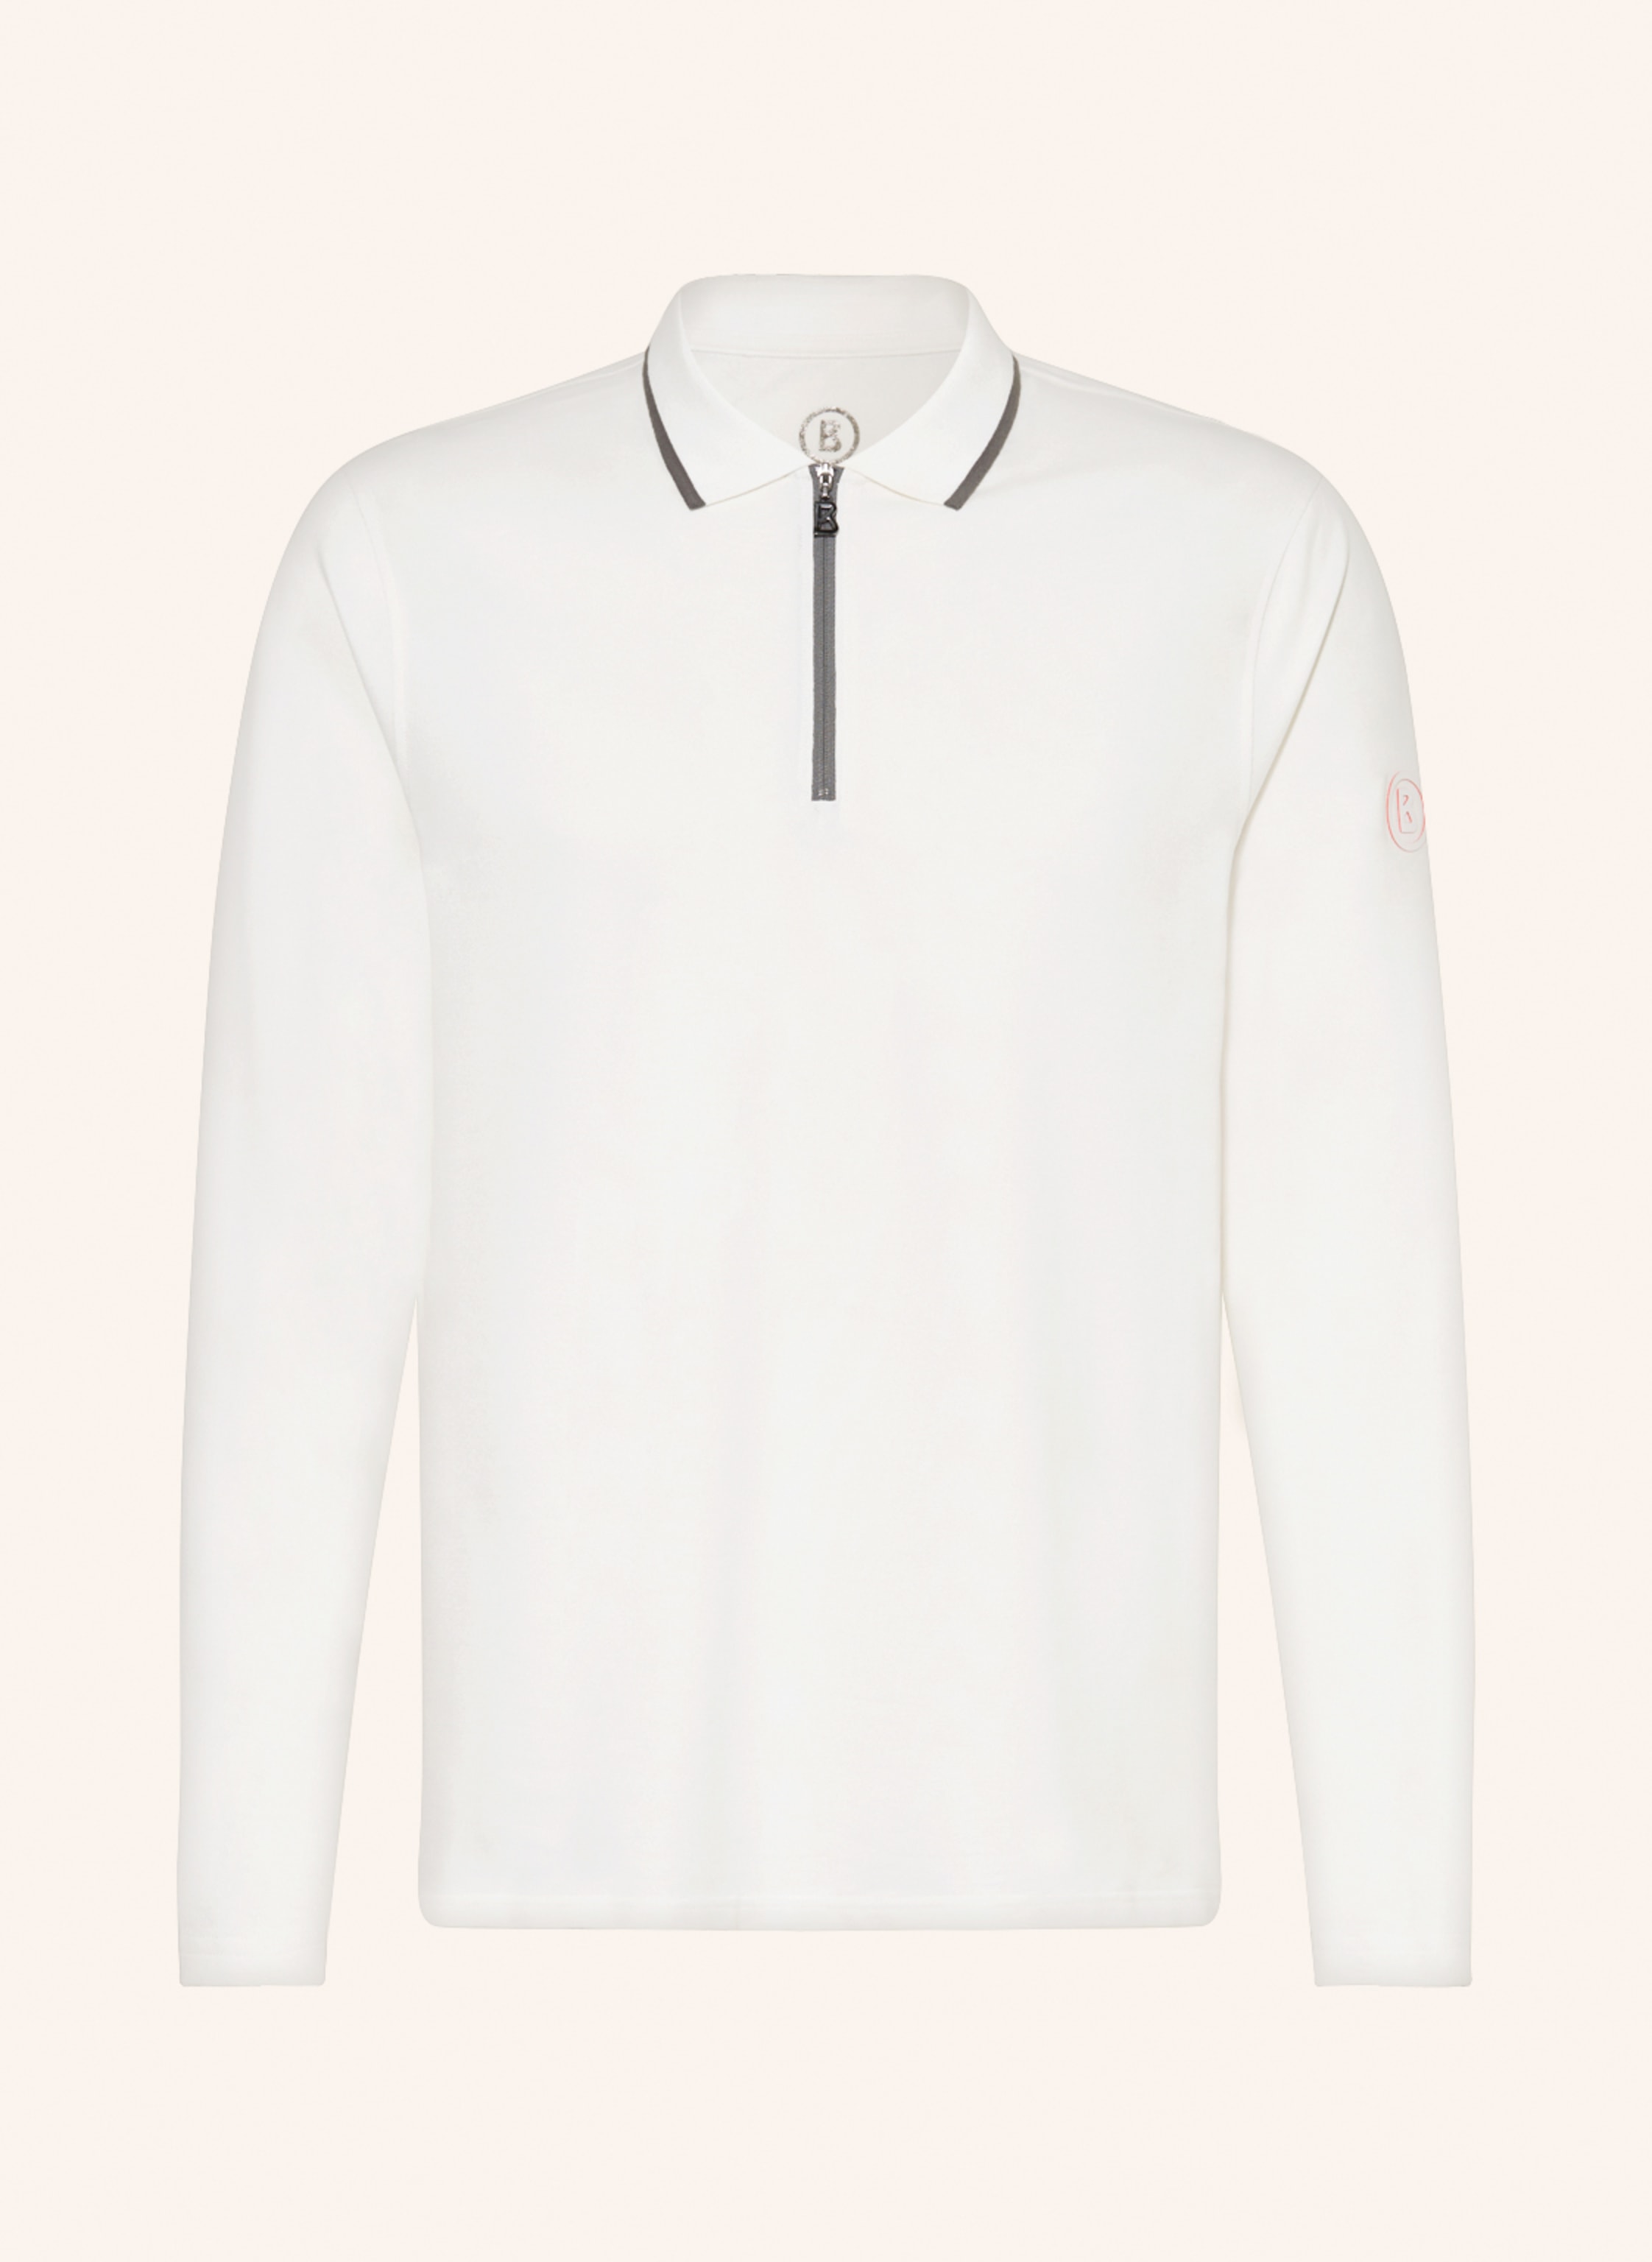 BOGNER Funktions-Poloshirt GASTON in weiss